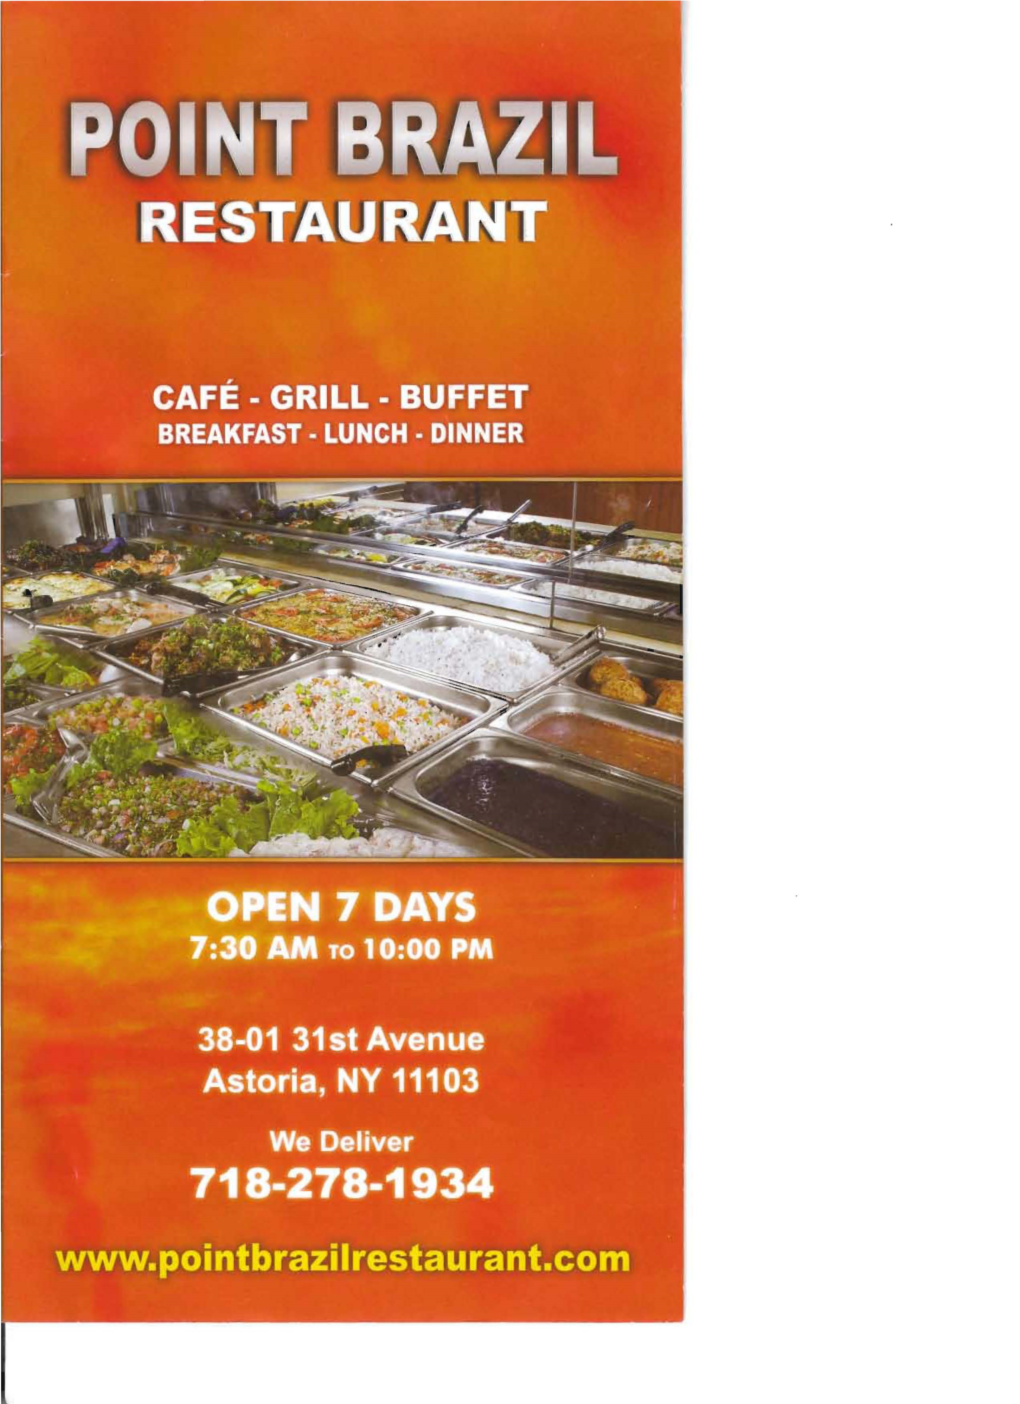 MENU for DELIVERY PLEASE NOTE· We Do Not Delivery Food from the Buffet